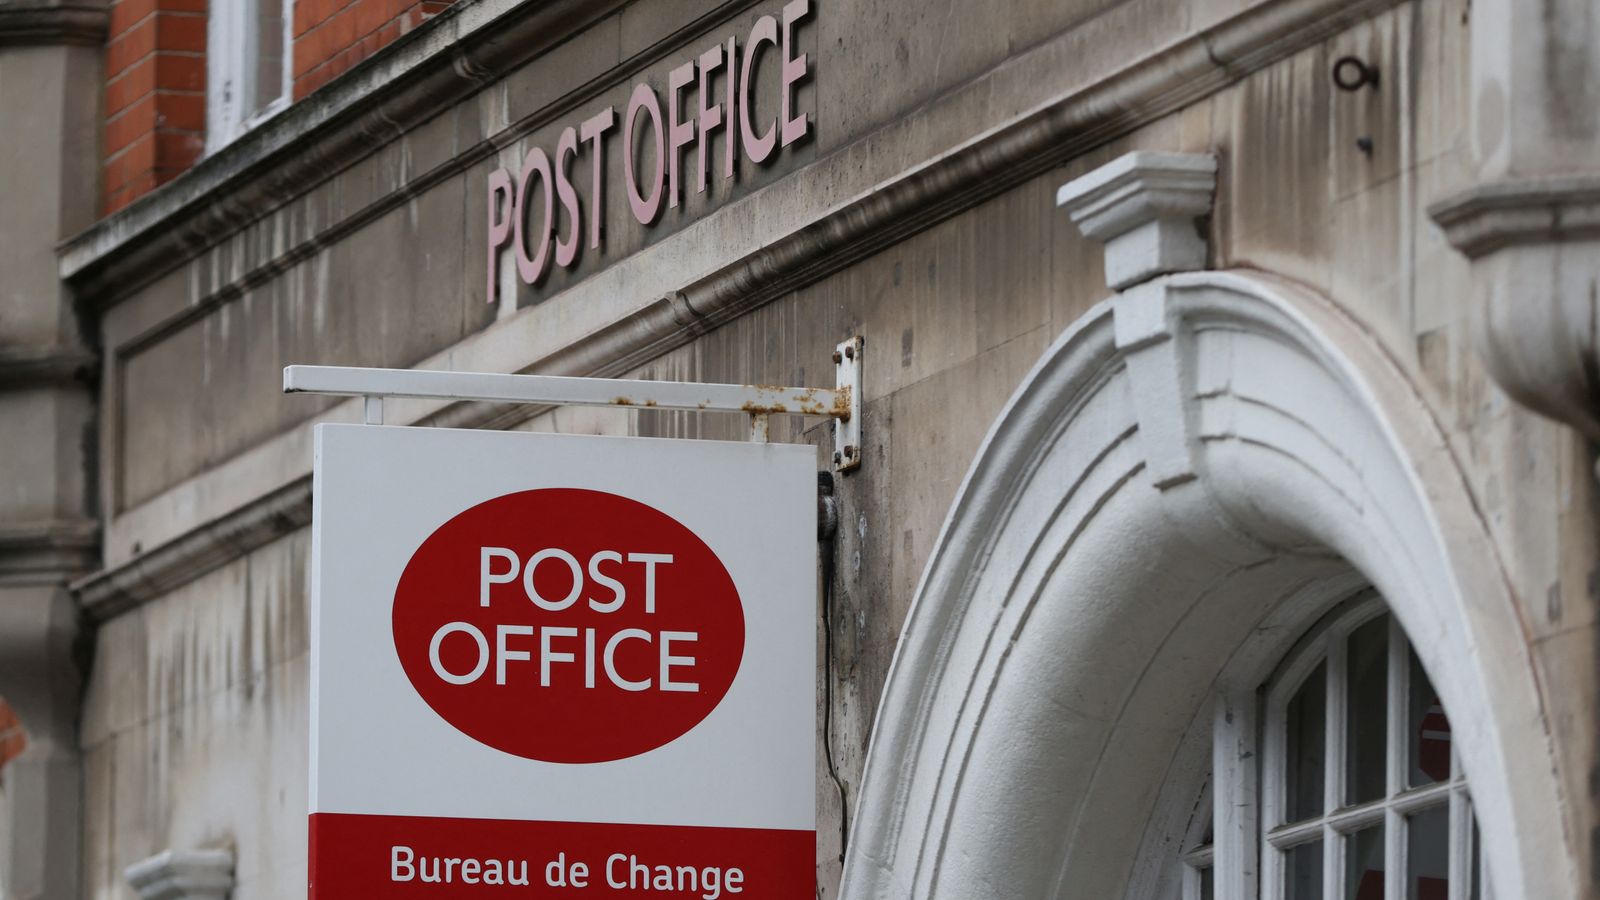 At least 18 people have said they are concerned about accounting software Capture, which was installed by several post offices around the country in t